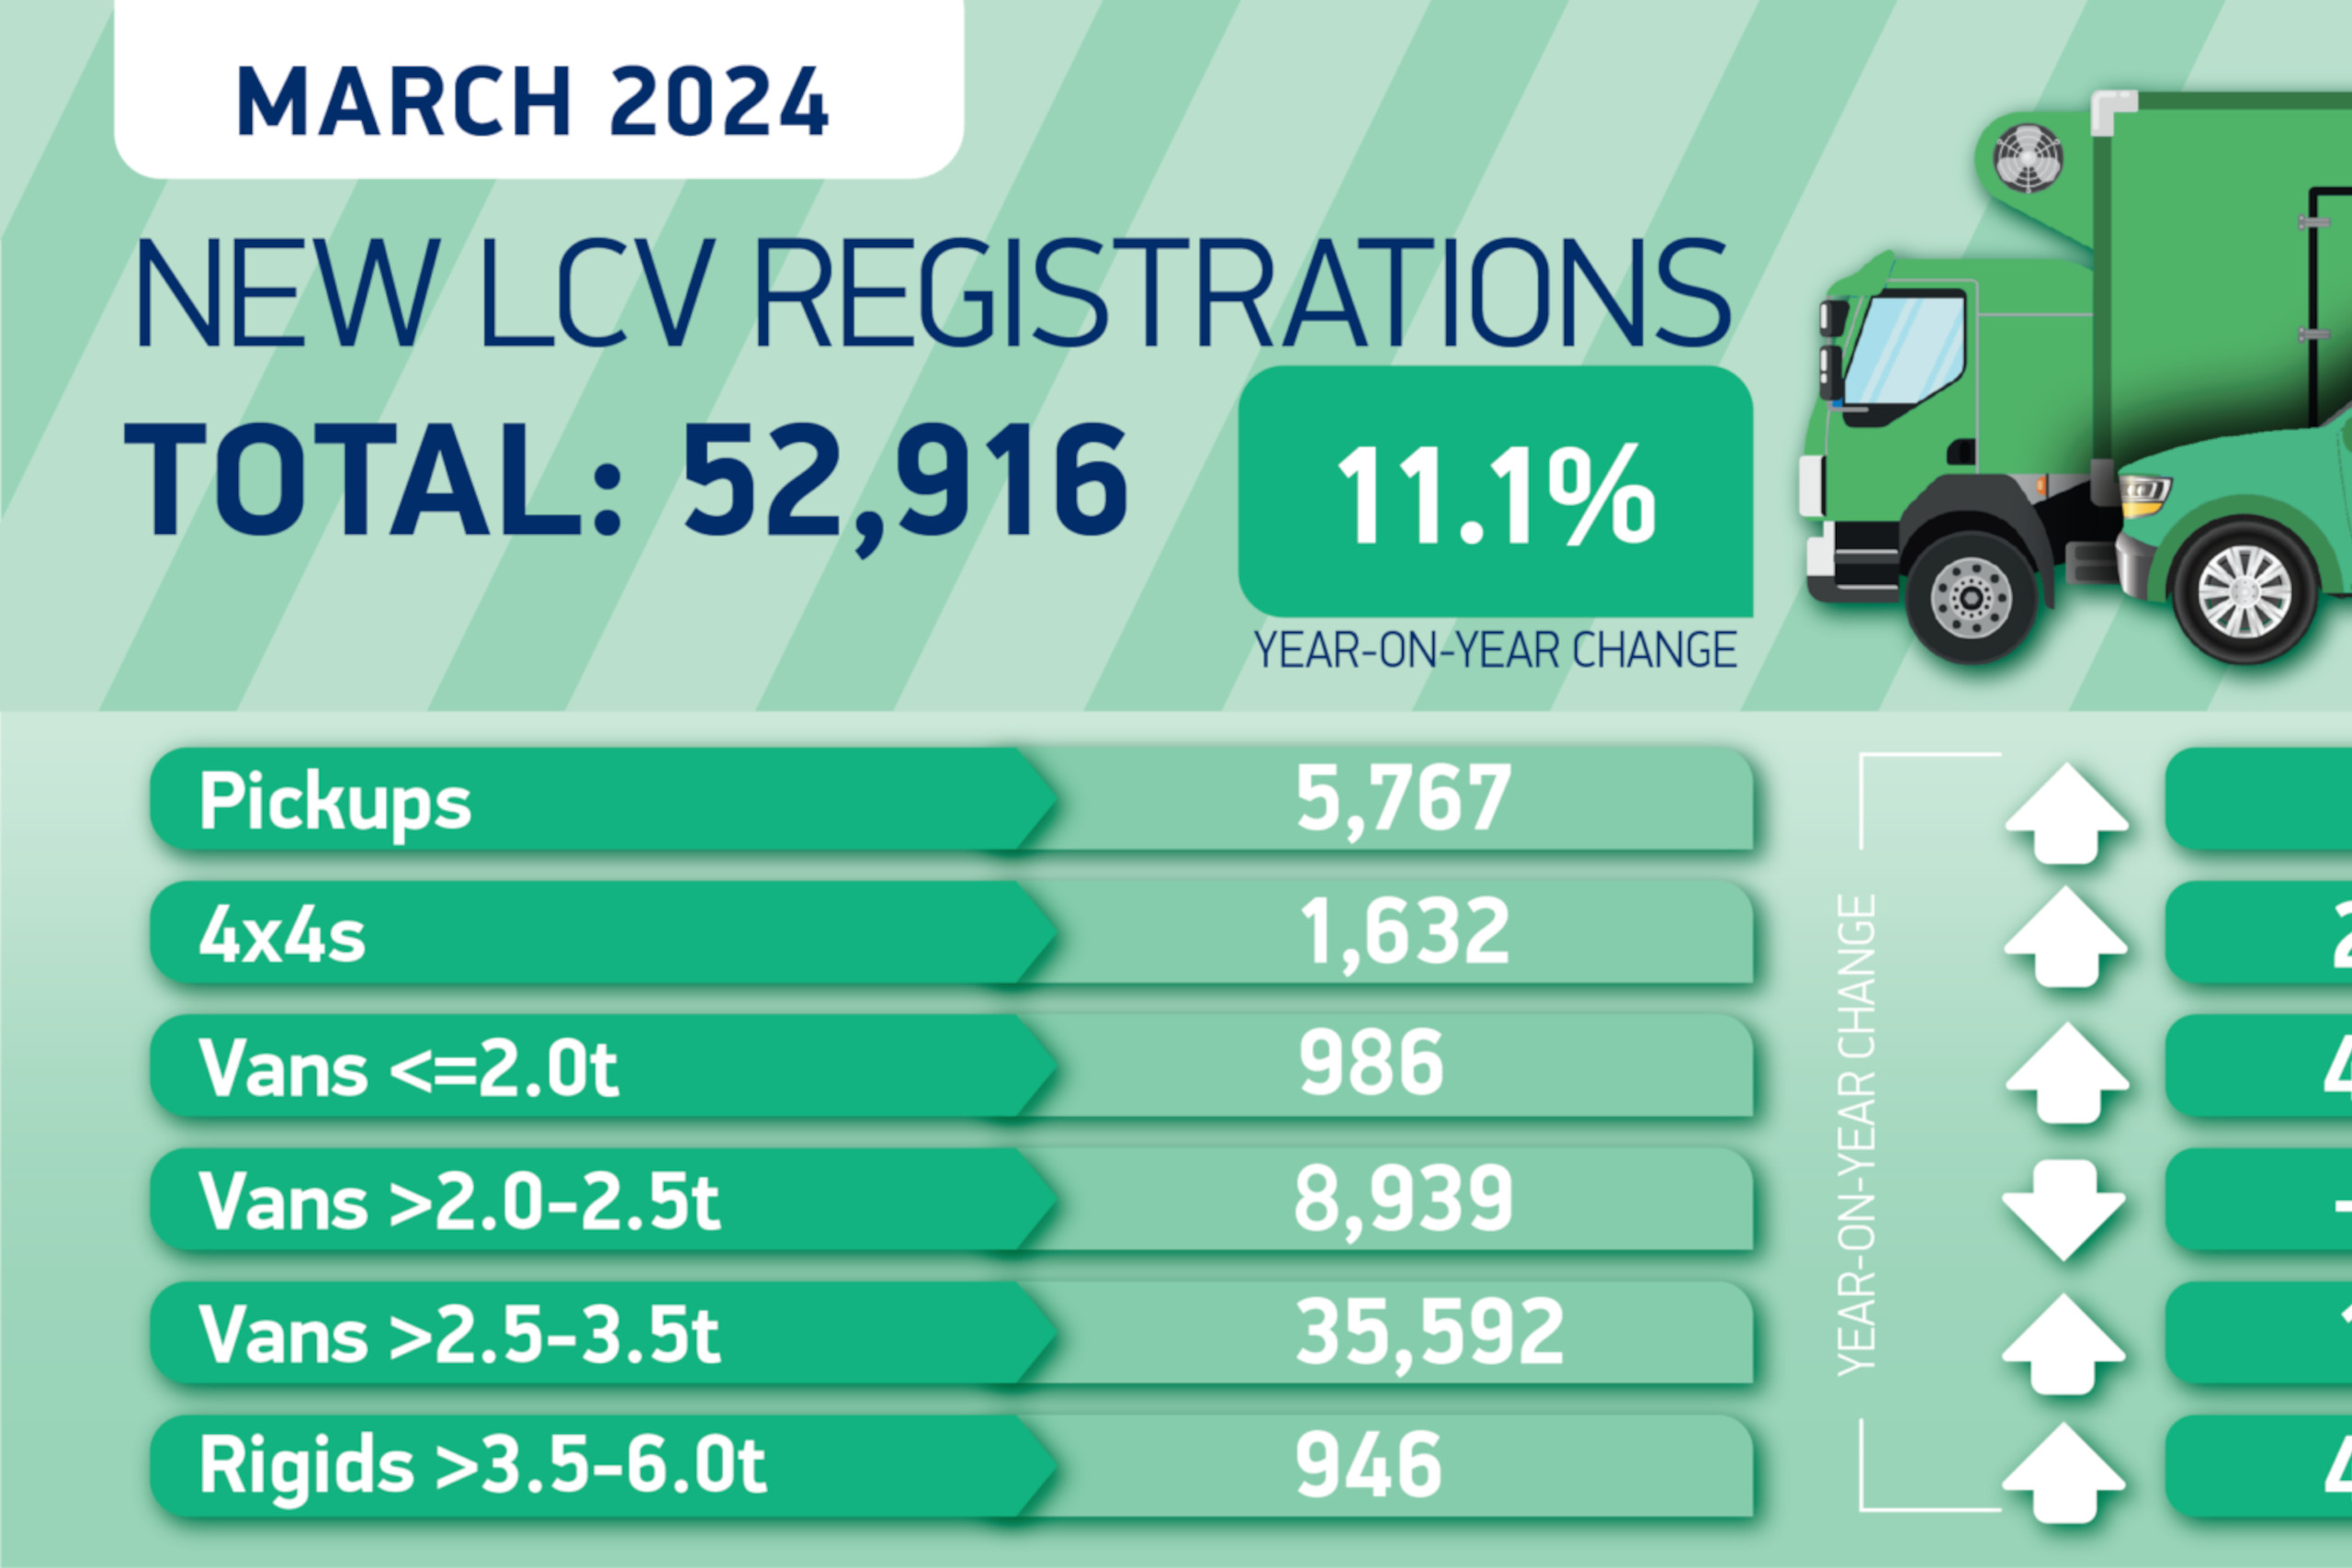 LCV Market Grows in March to Continue the Upward Trend